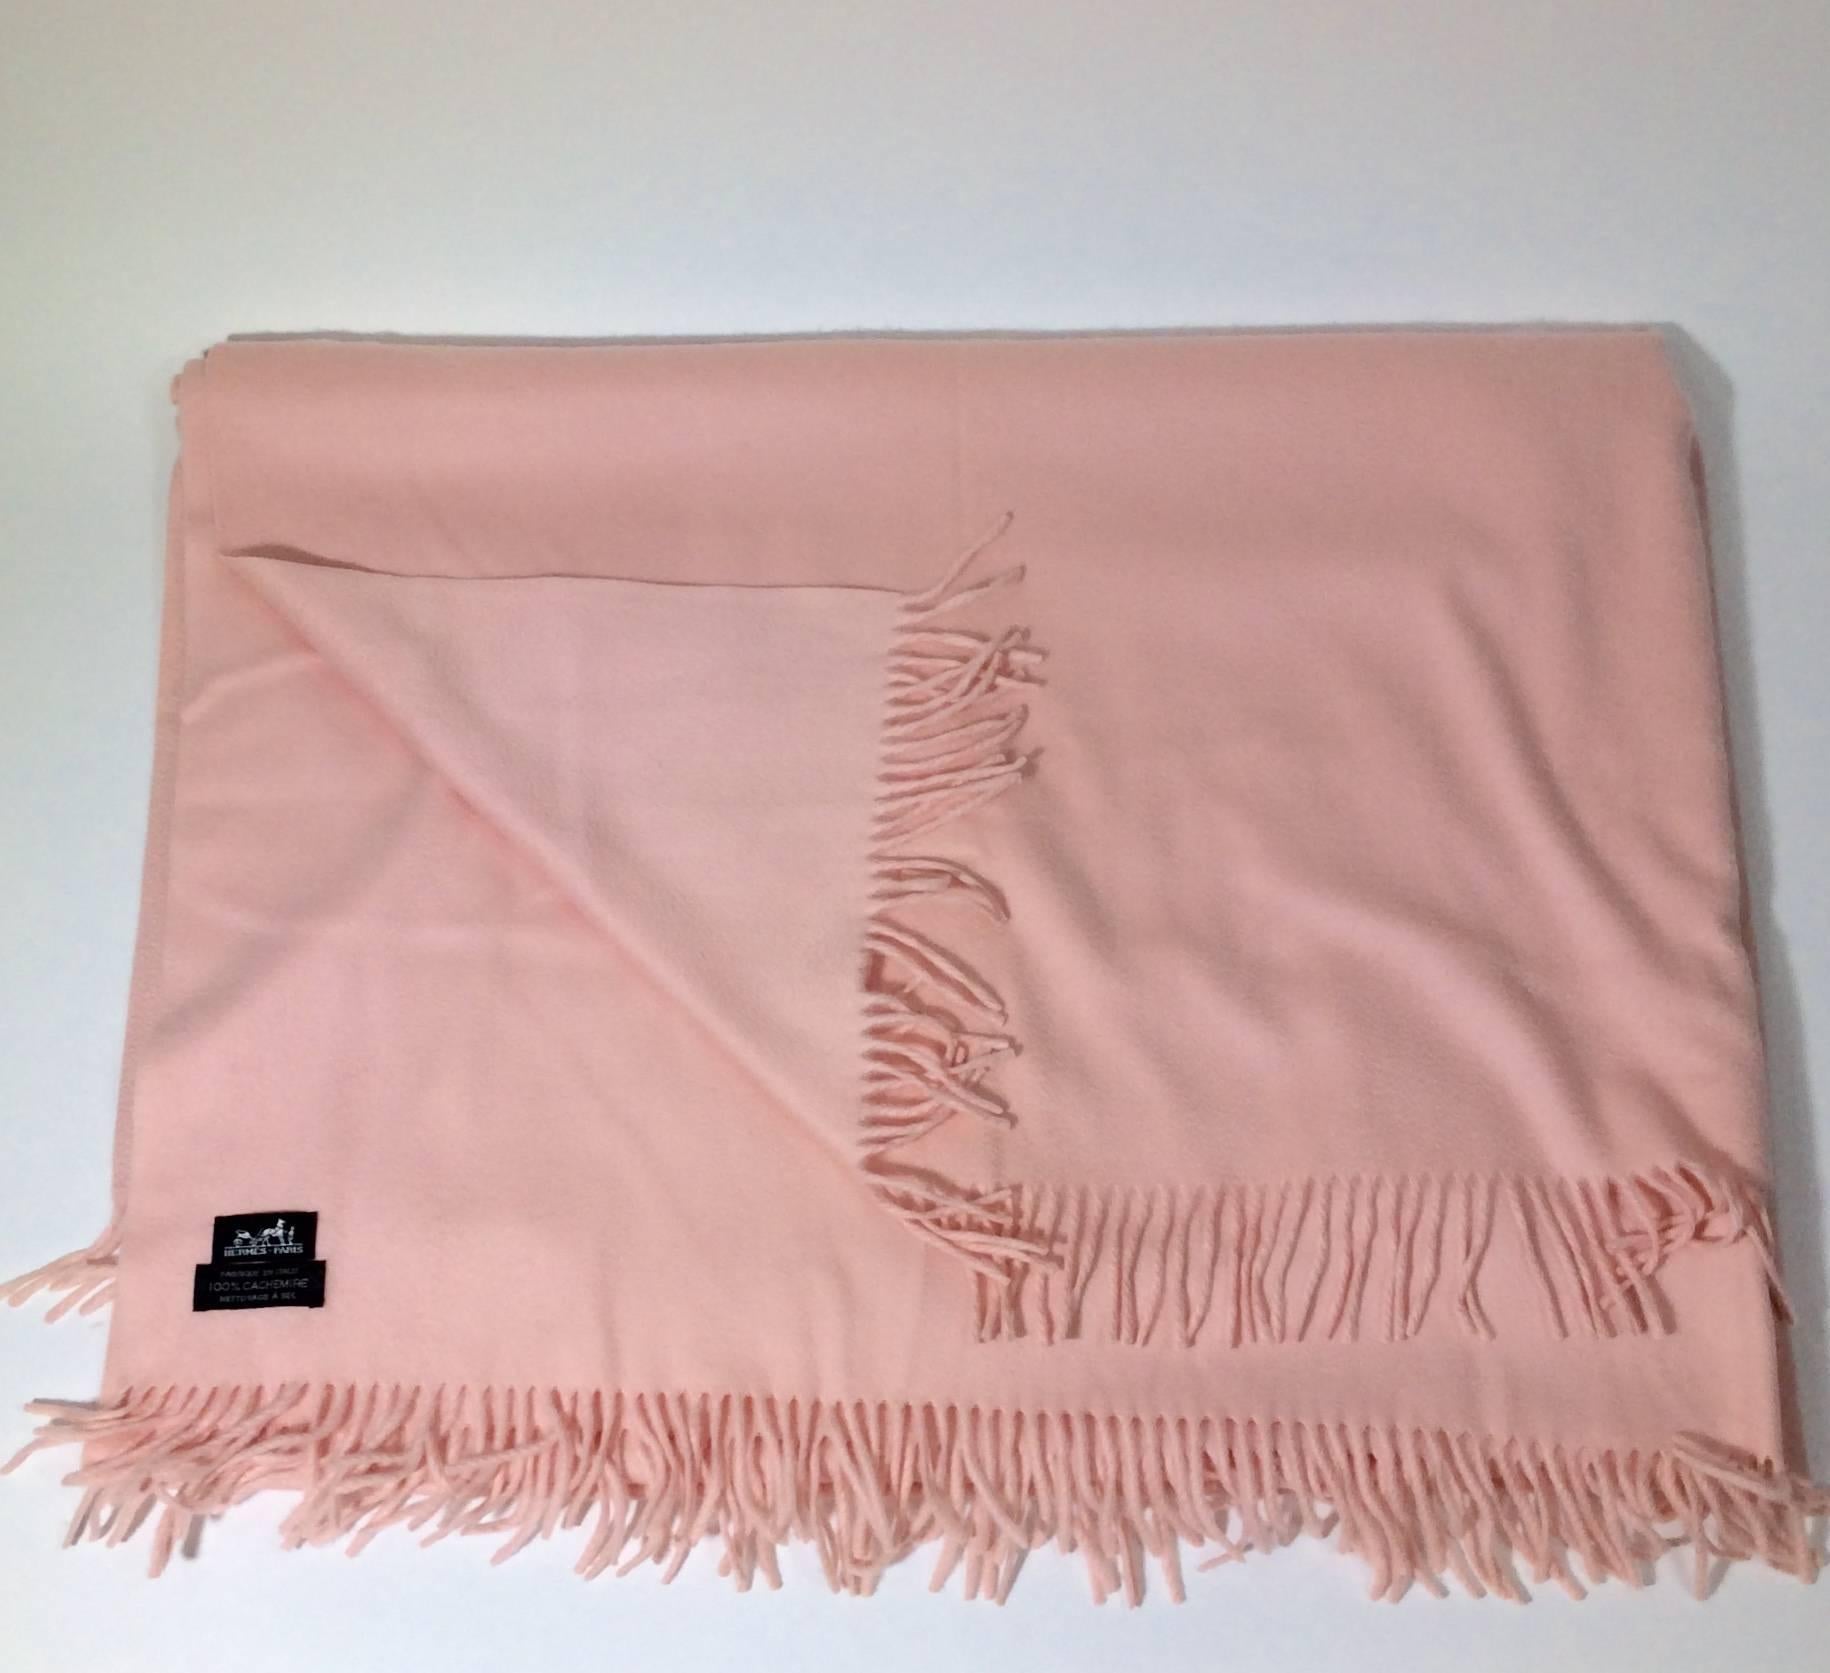 Baby Pink Cashmere
Fringe on top and bottom 
